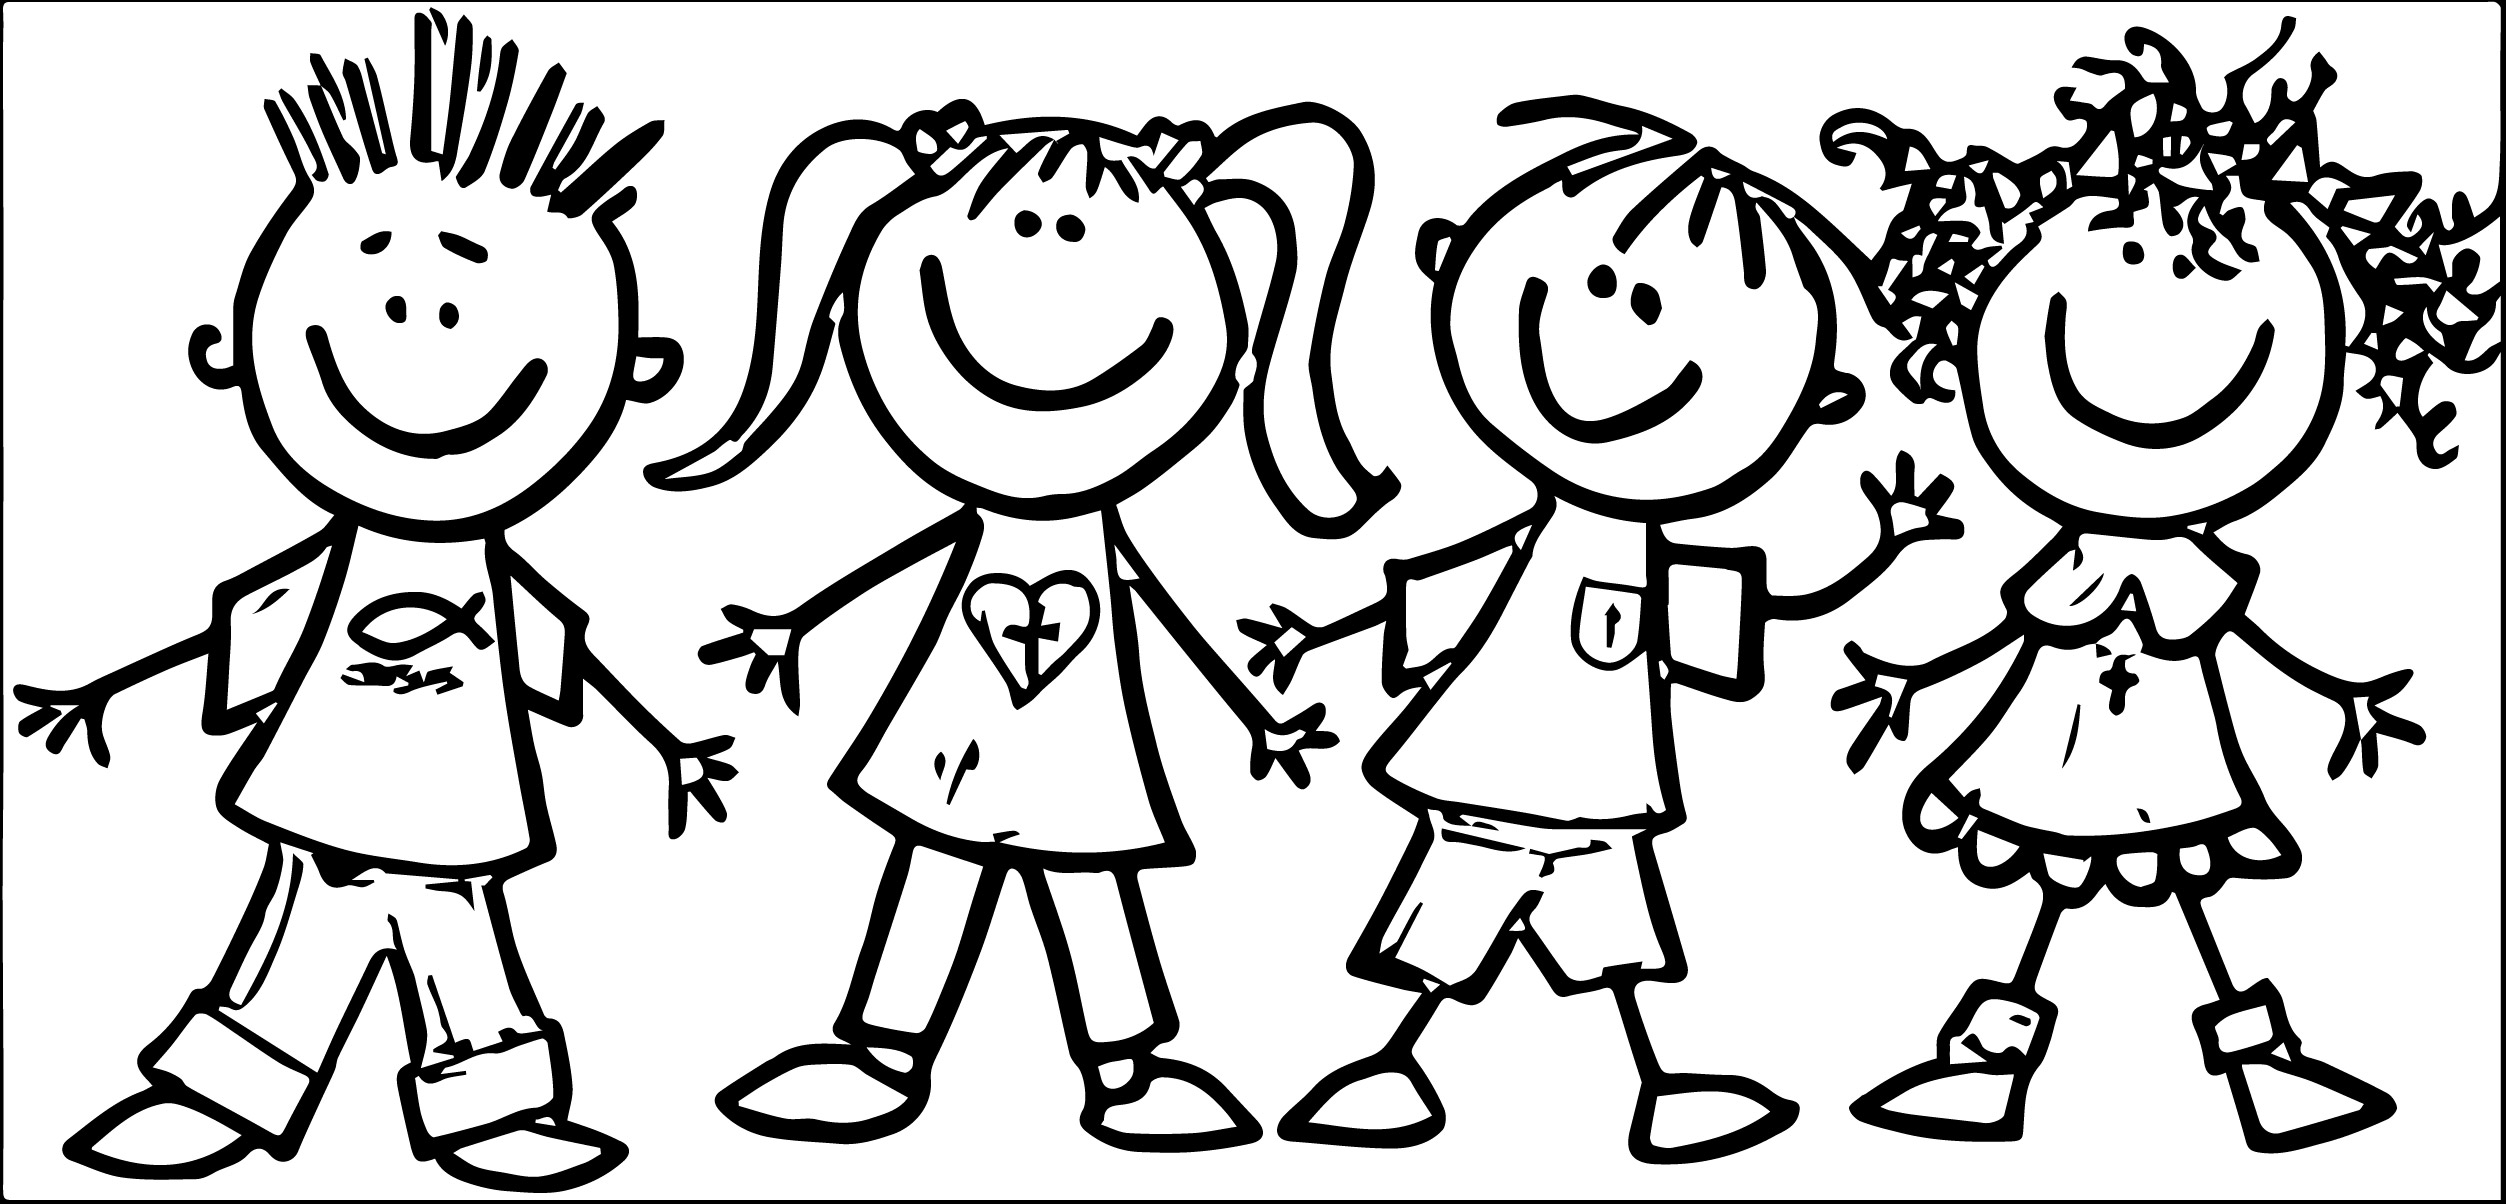 Kids free clip art children playing free clipart images 2 